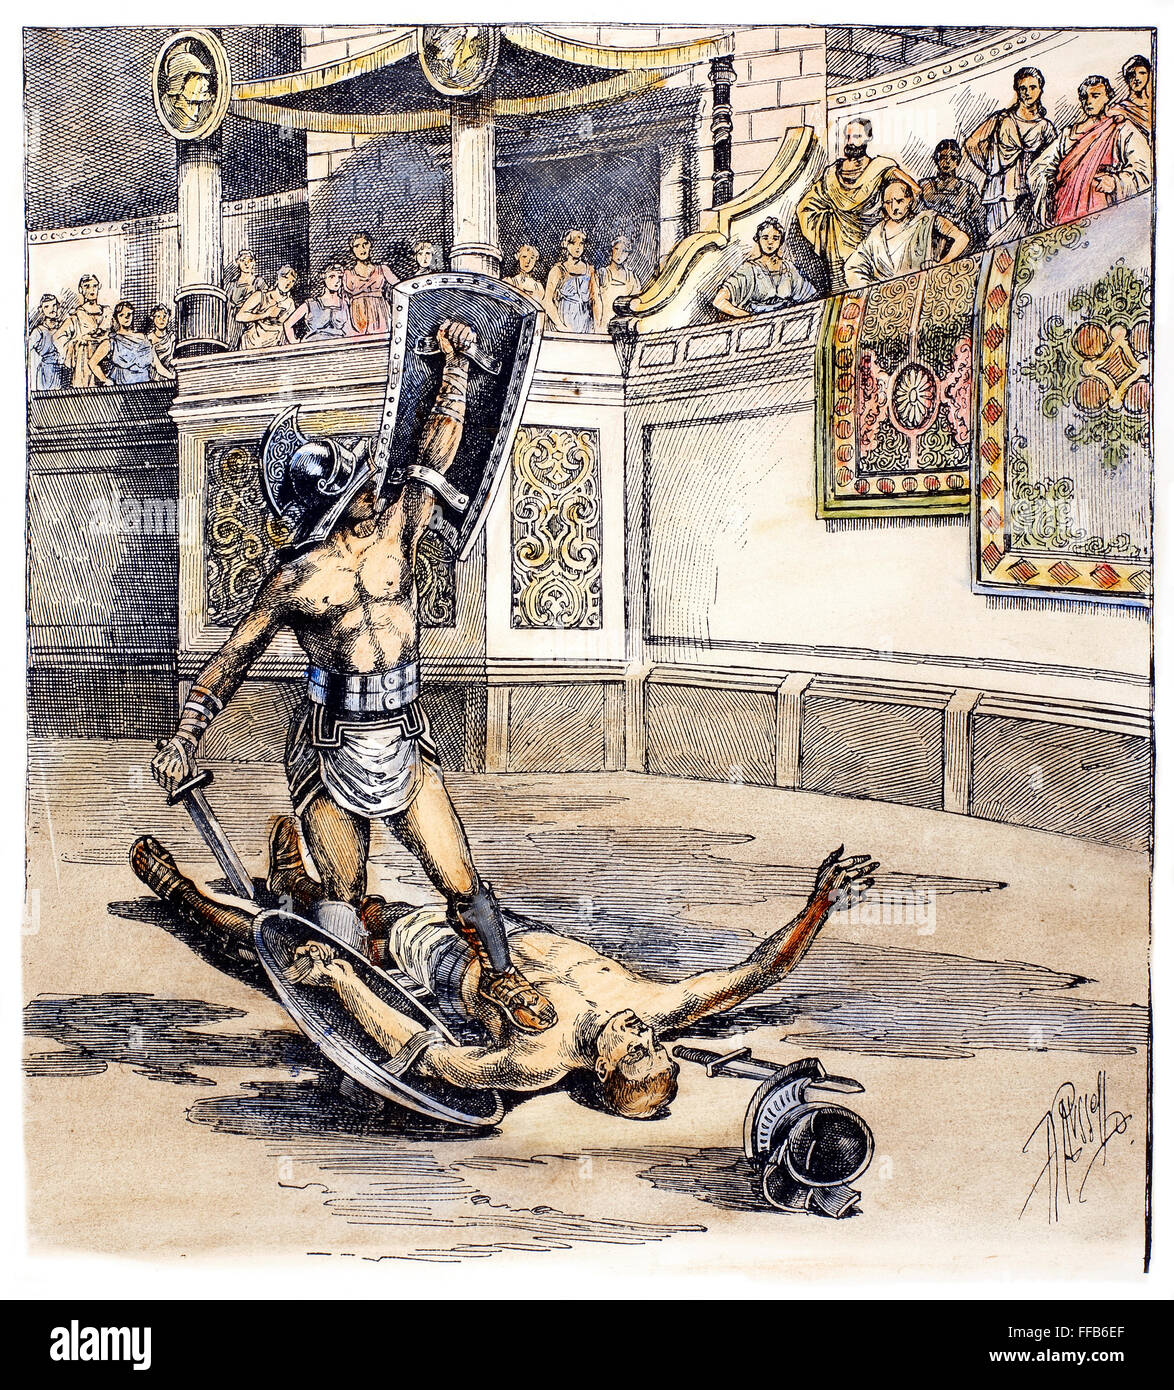 ROMAN GLADIATORS. /nThe conclusion of a duel between gladiators in the arena in ancient Rome. Line engraving, American, 1892. Stock Photo